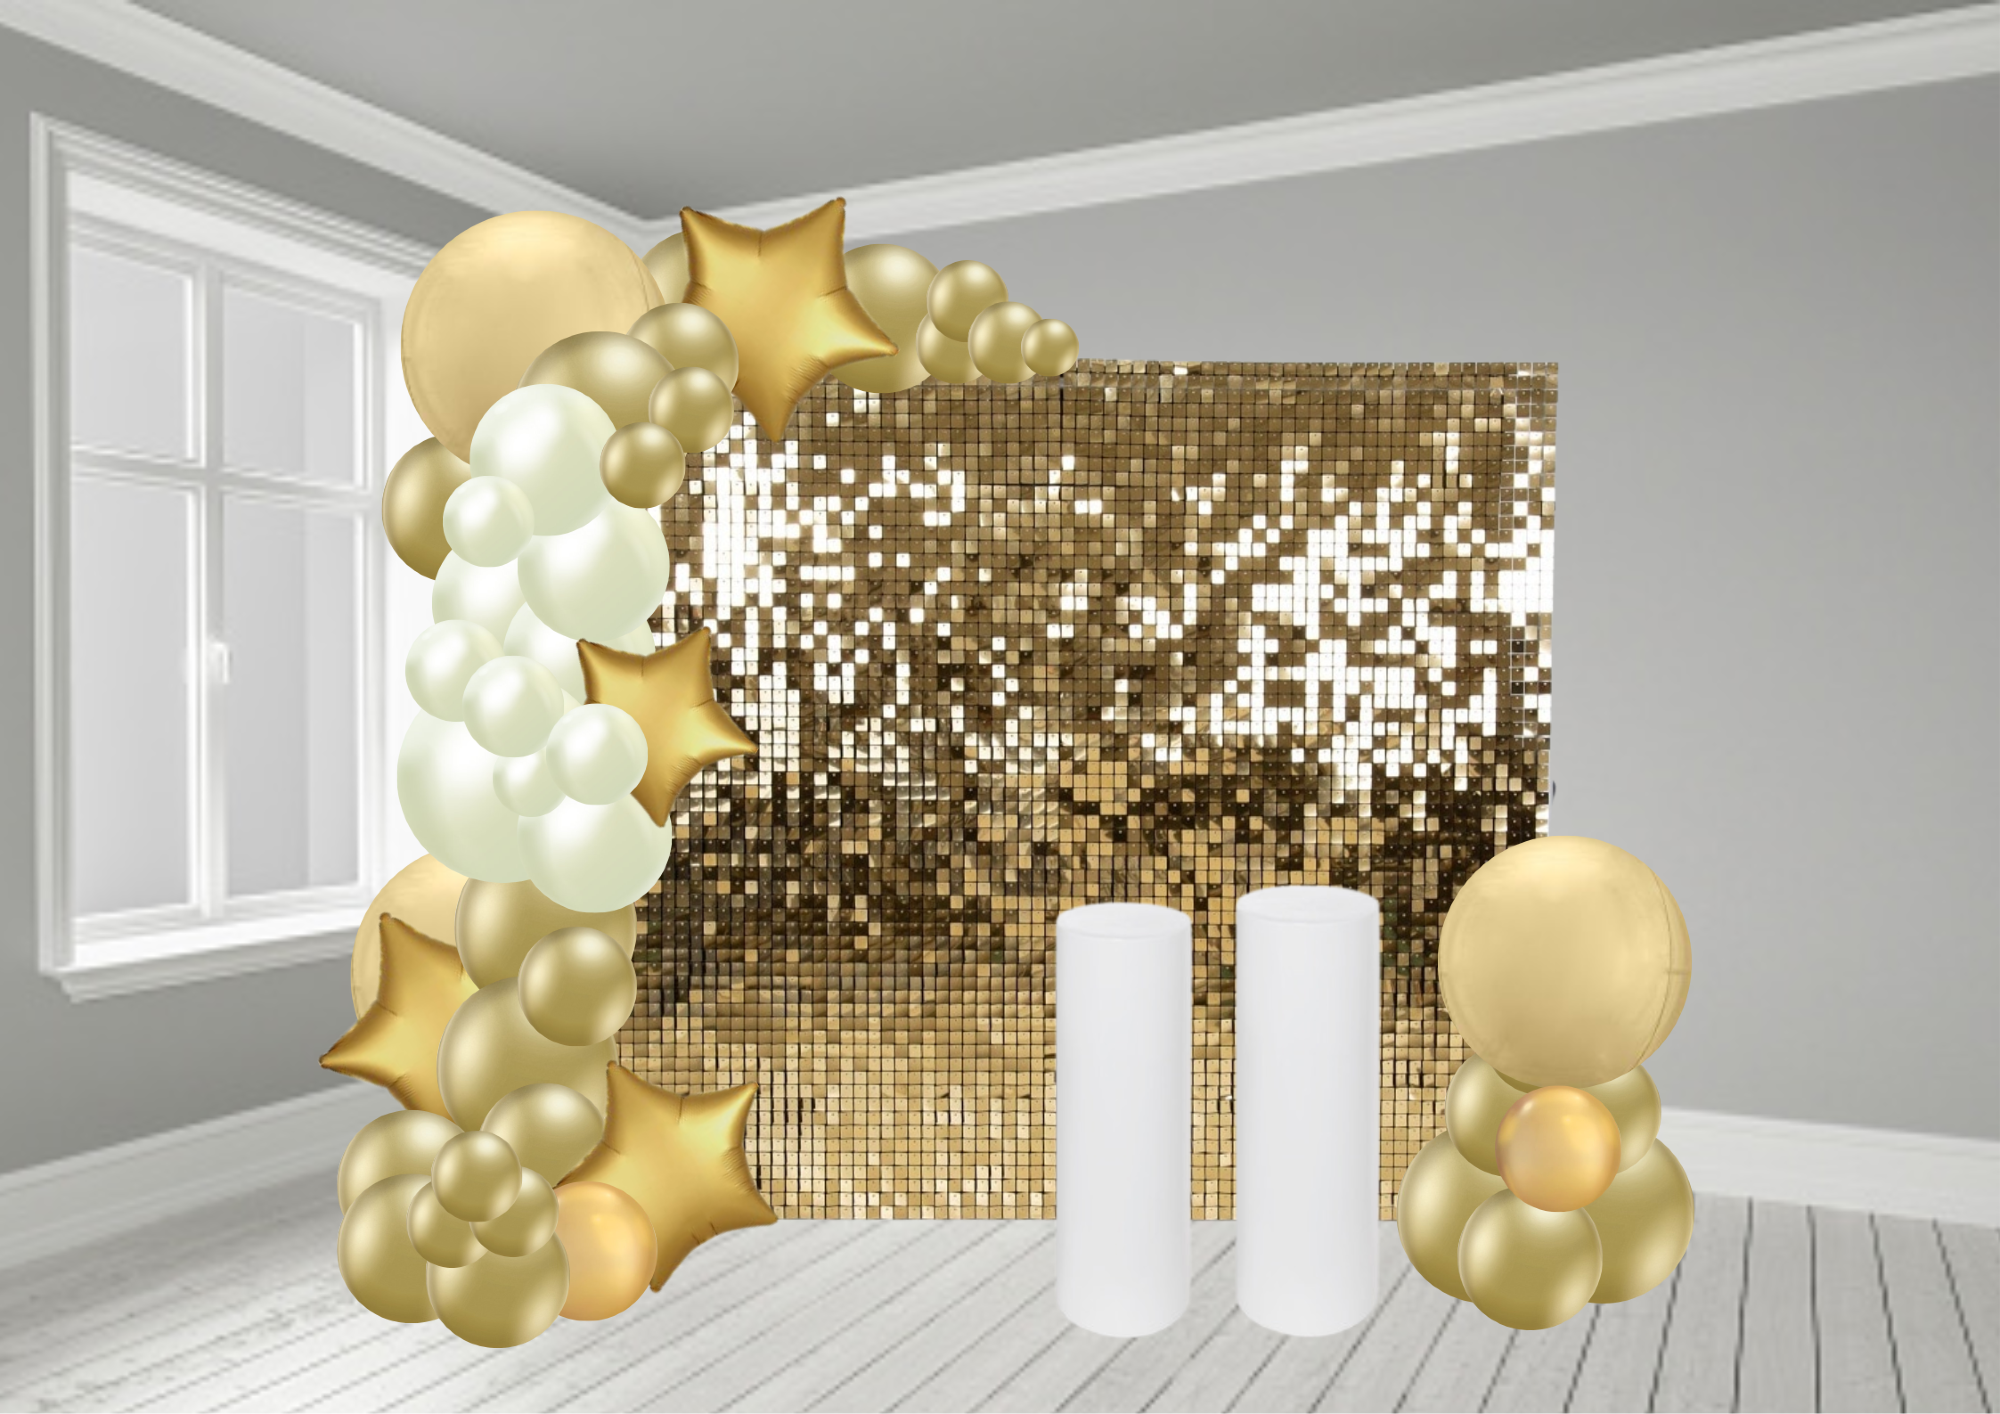 Sequin wall & half balloon arch with cake stands.